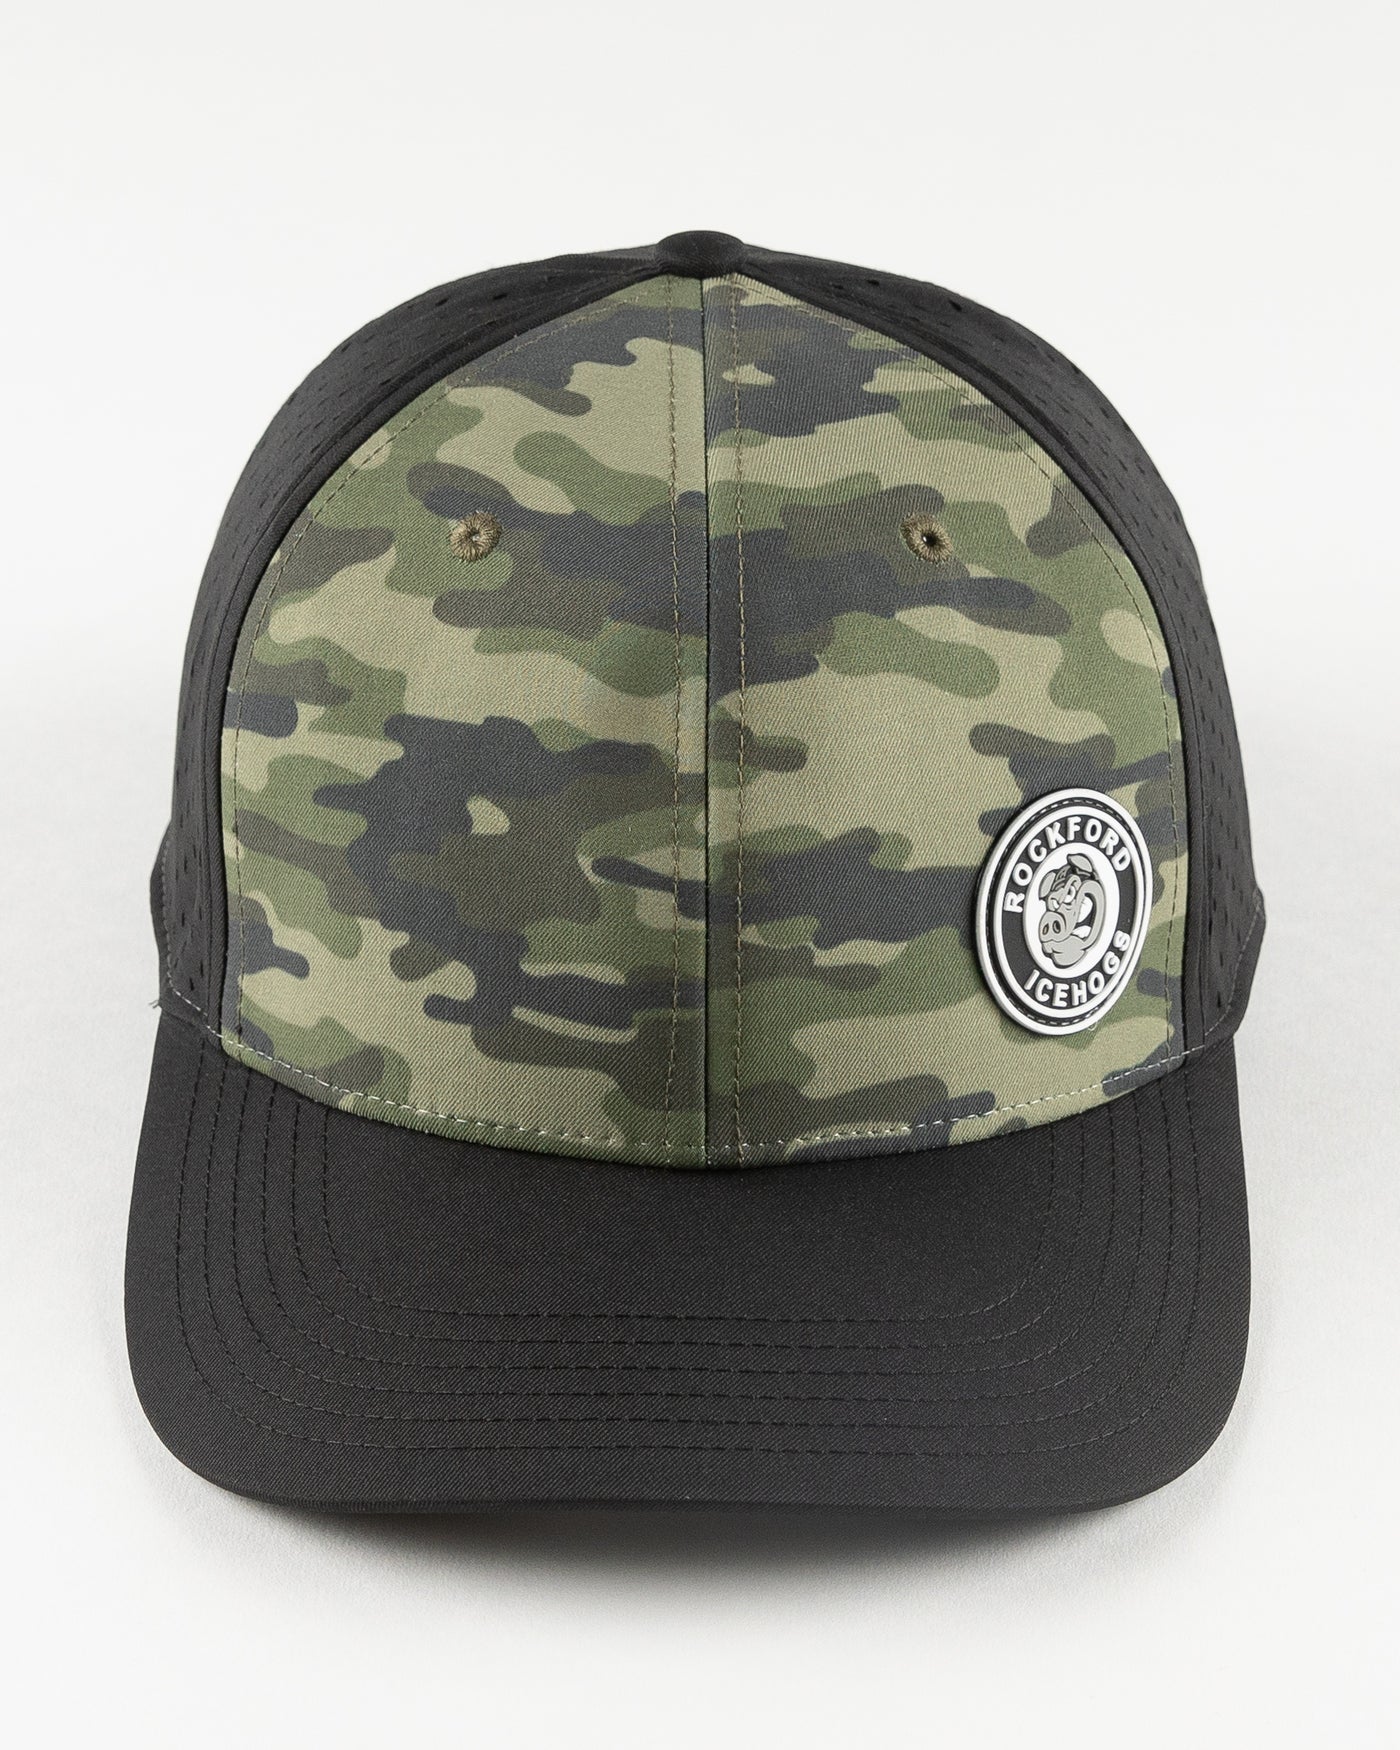 black and camo Rockford IceHogs adjustable cap - front lay flat